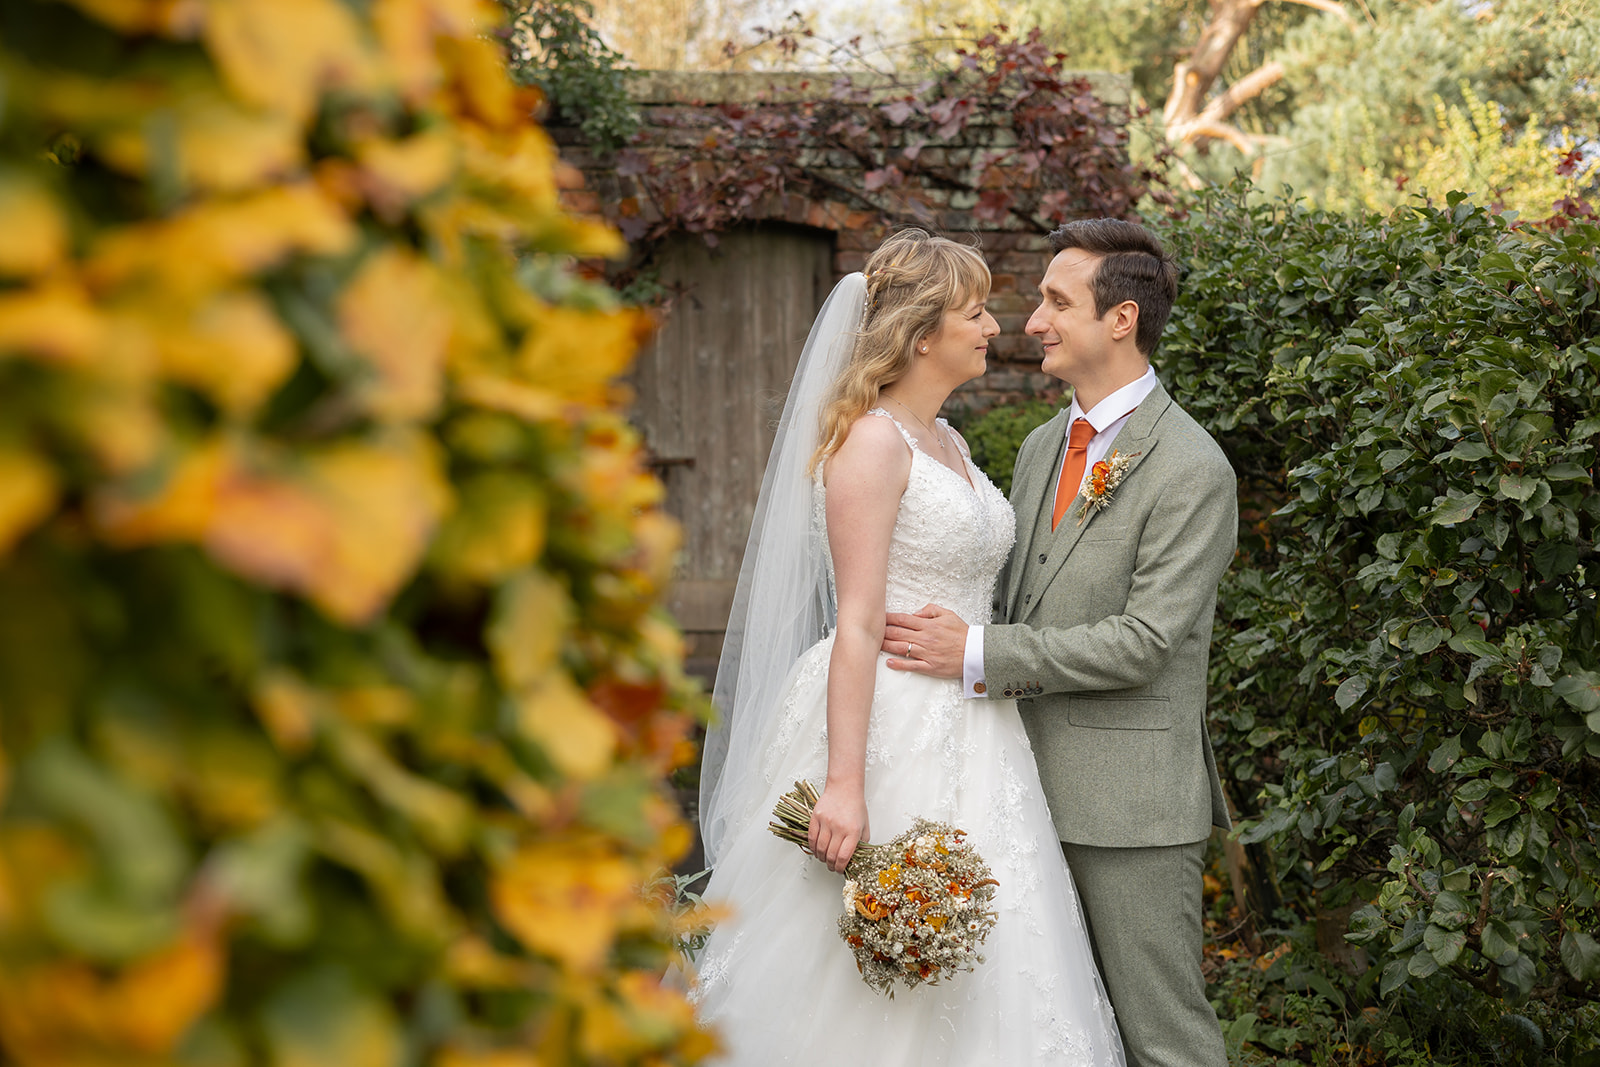 Pimhill Barn wedding gardens in autumn with couple by walled garden